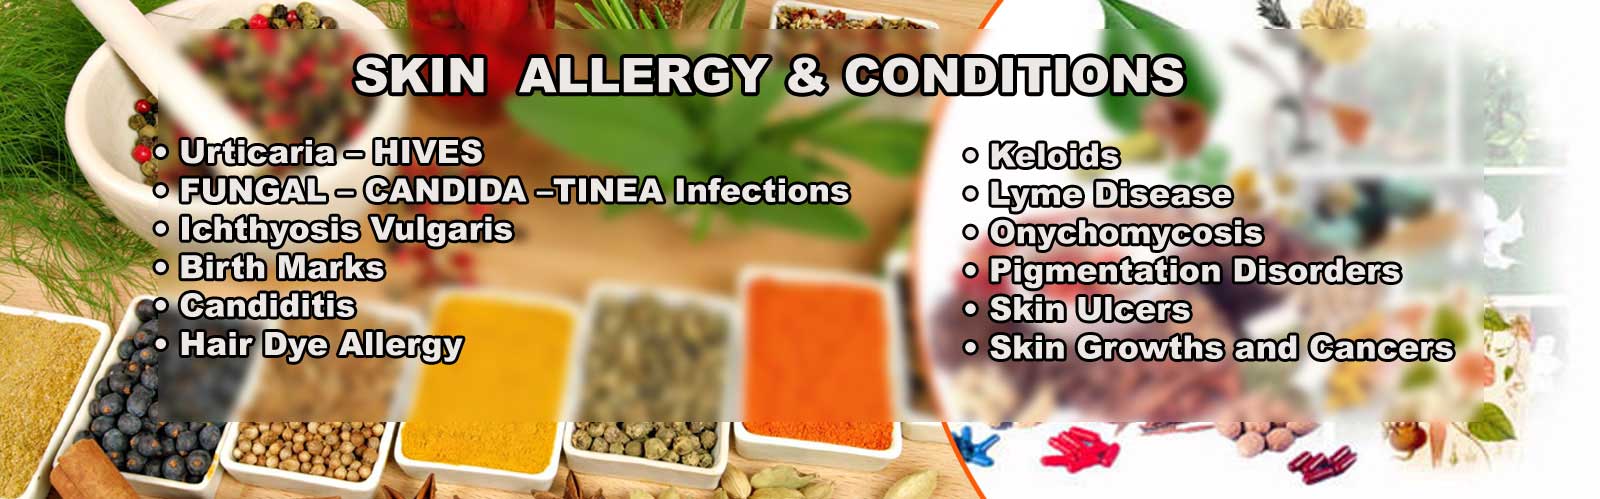 SKIN  ALLERGY & CONDITIONS